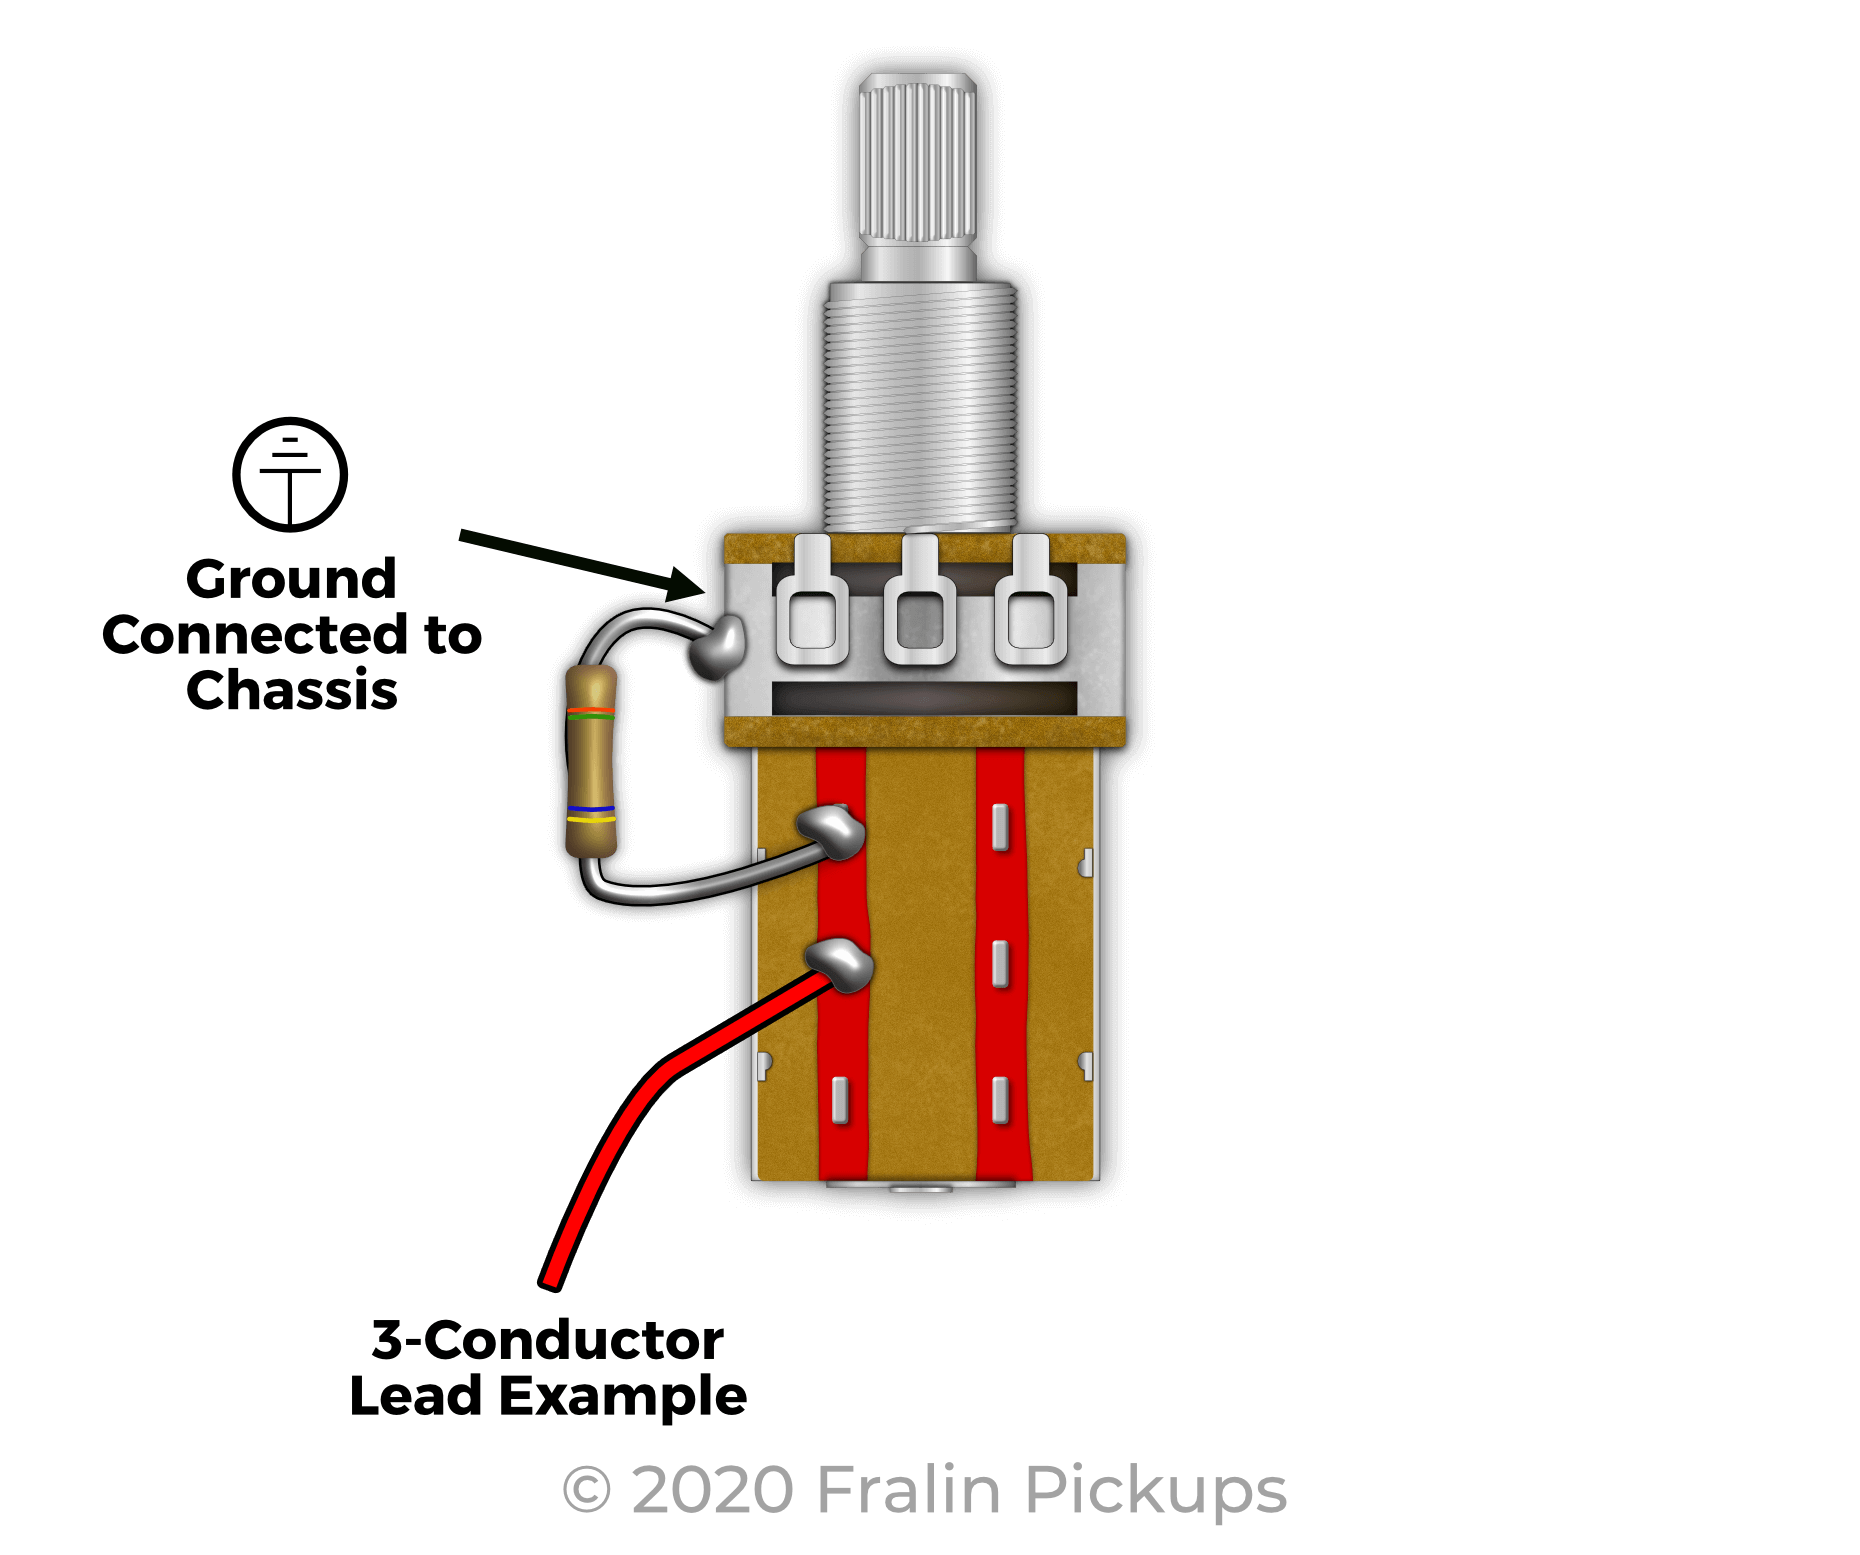 Wiring Diagram For 2 Humbucker Guitar With 3 Way Switch 2 Volume And 2 Tone Pots from www.fralinpickups.com